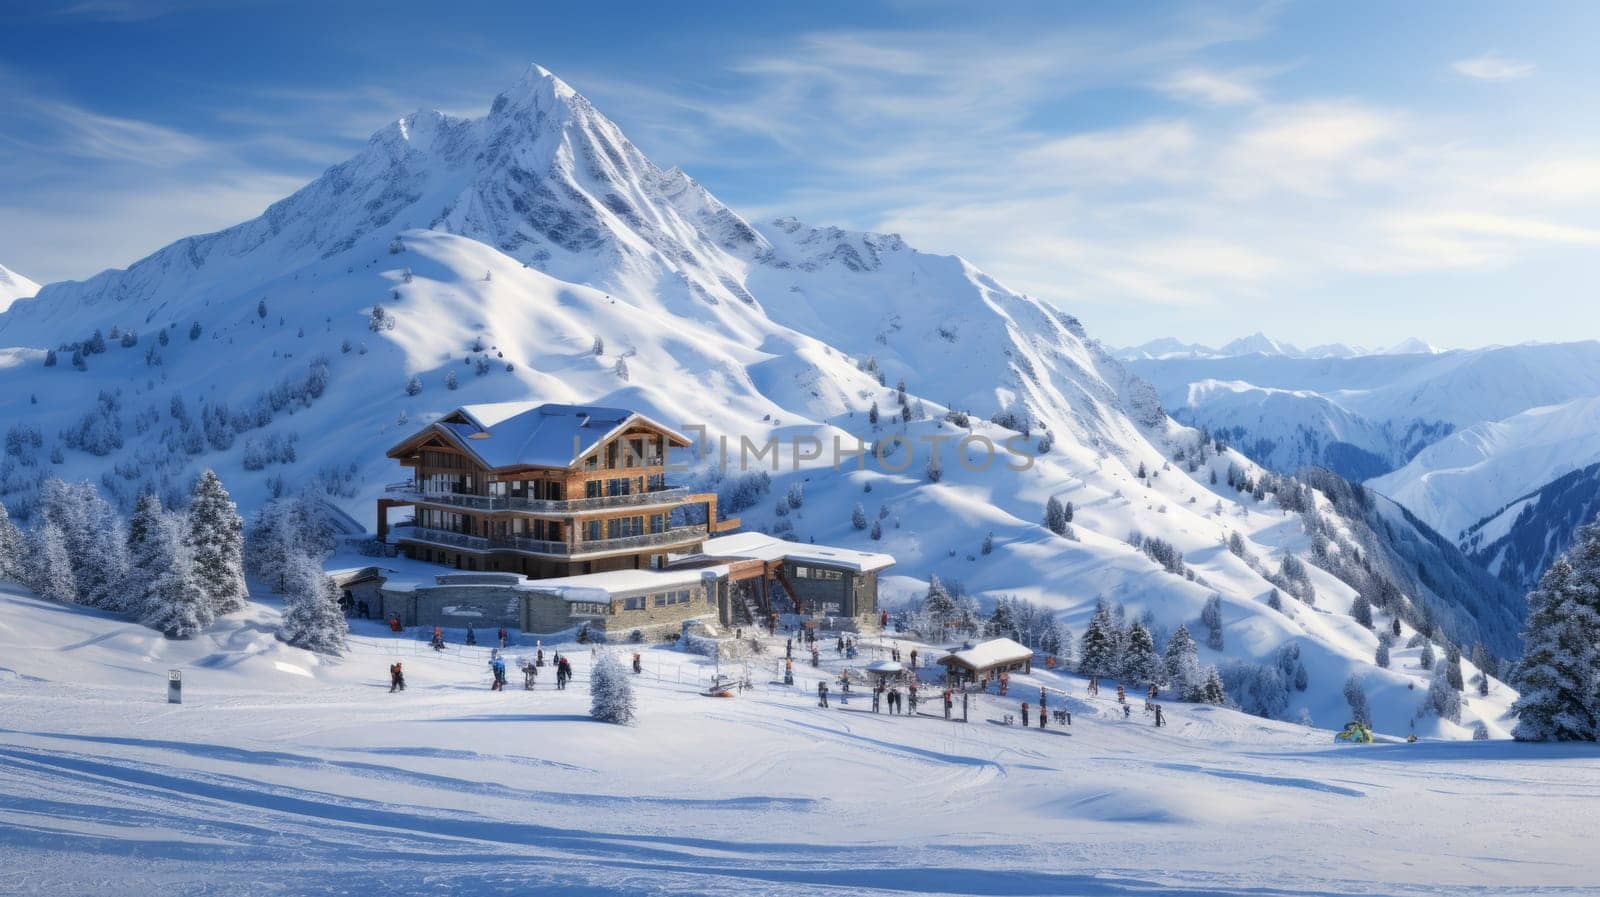 Skiers near a cozy mountain lodge amidst a snow-covered alpine landscape.